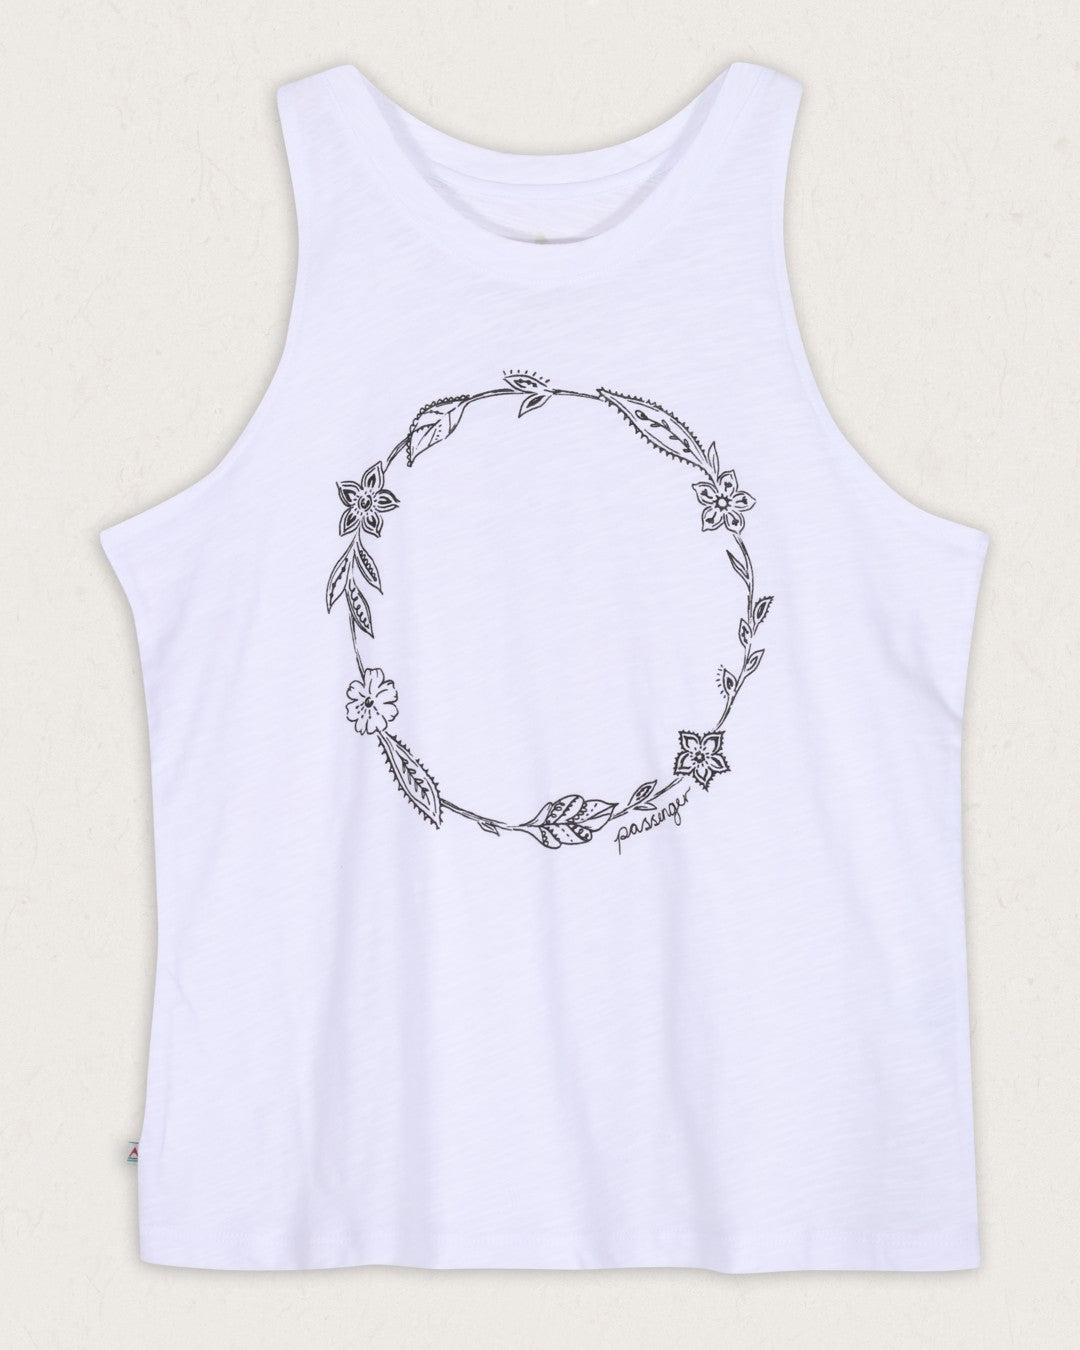 Daisy Chain Recycled Cotton Vest - White